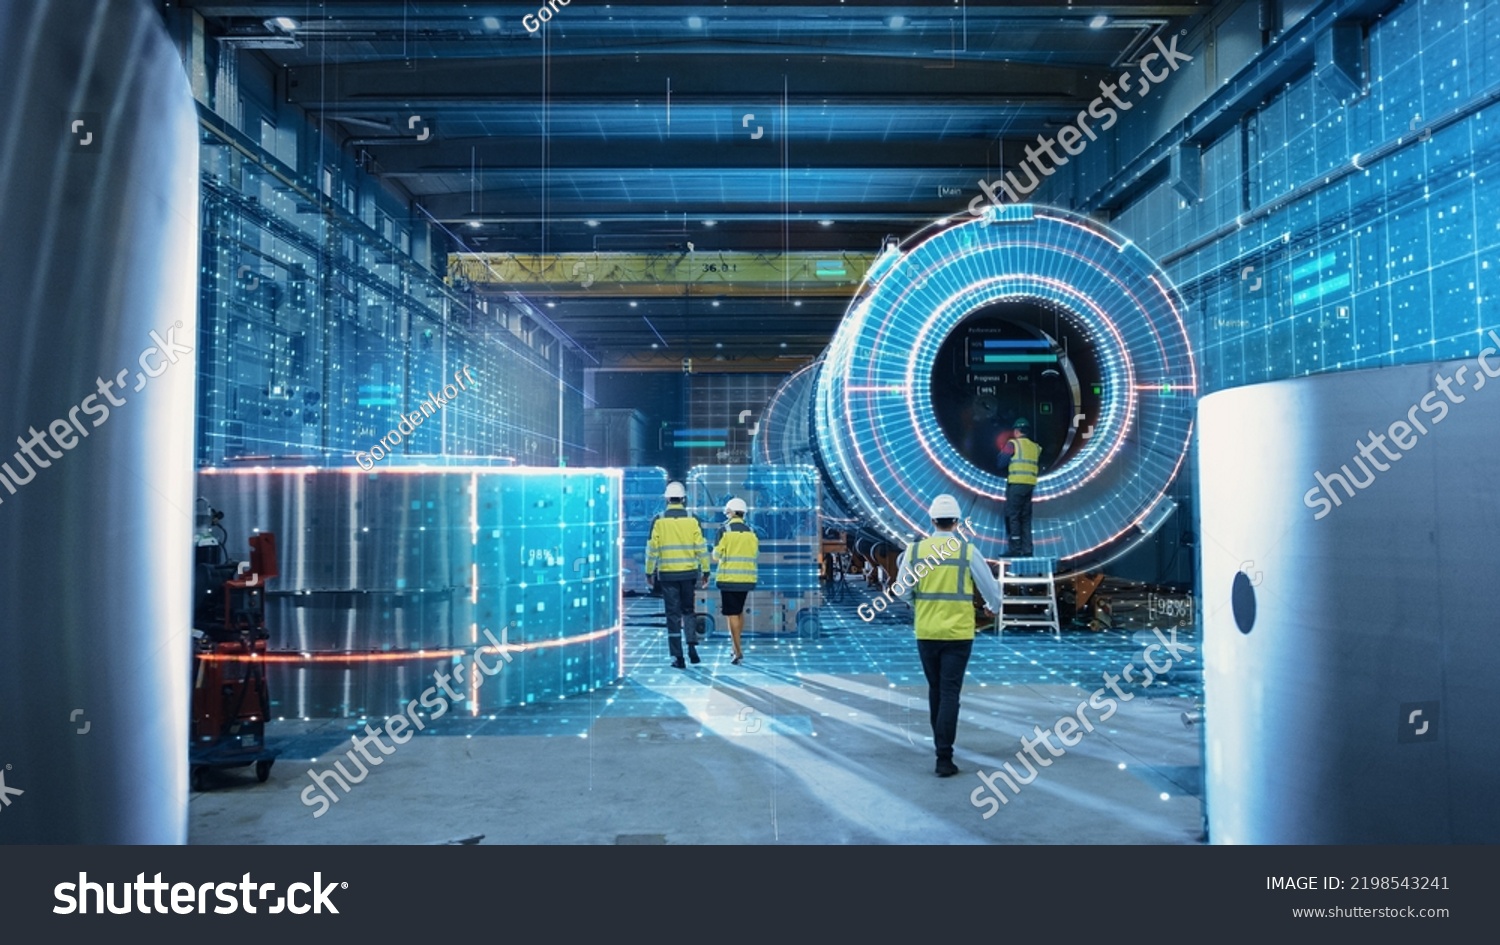 Futuristic Technology Concept: Team of Engineers and Professionals Workers in Heavy Industry Manufacturing Factory that is Visualized with Graphics into Digital Twin of Industry 4.0 High Tech #2198543241